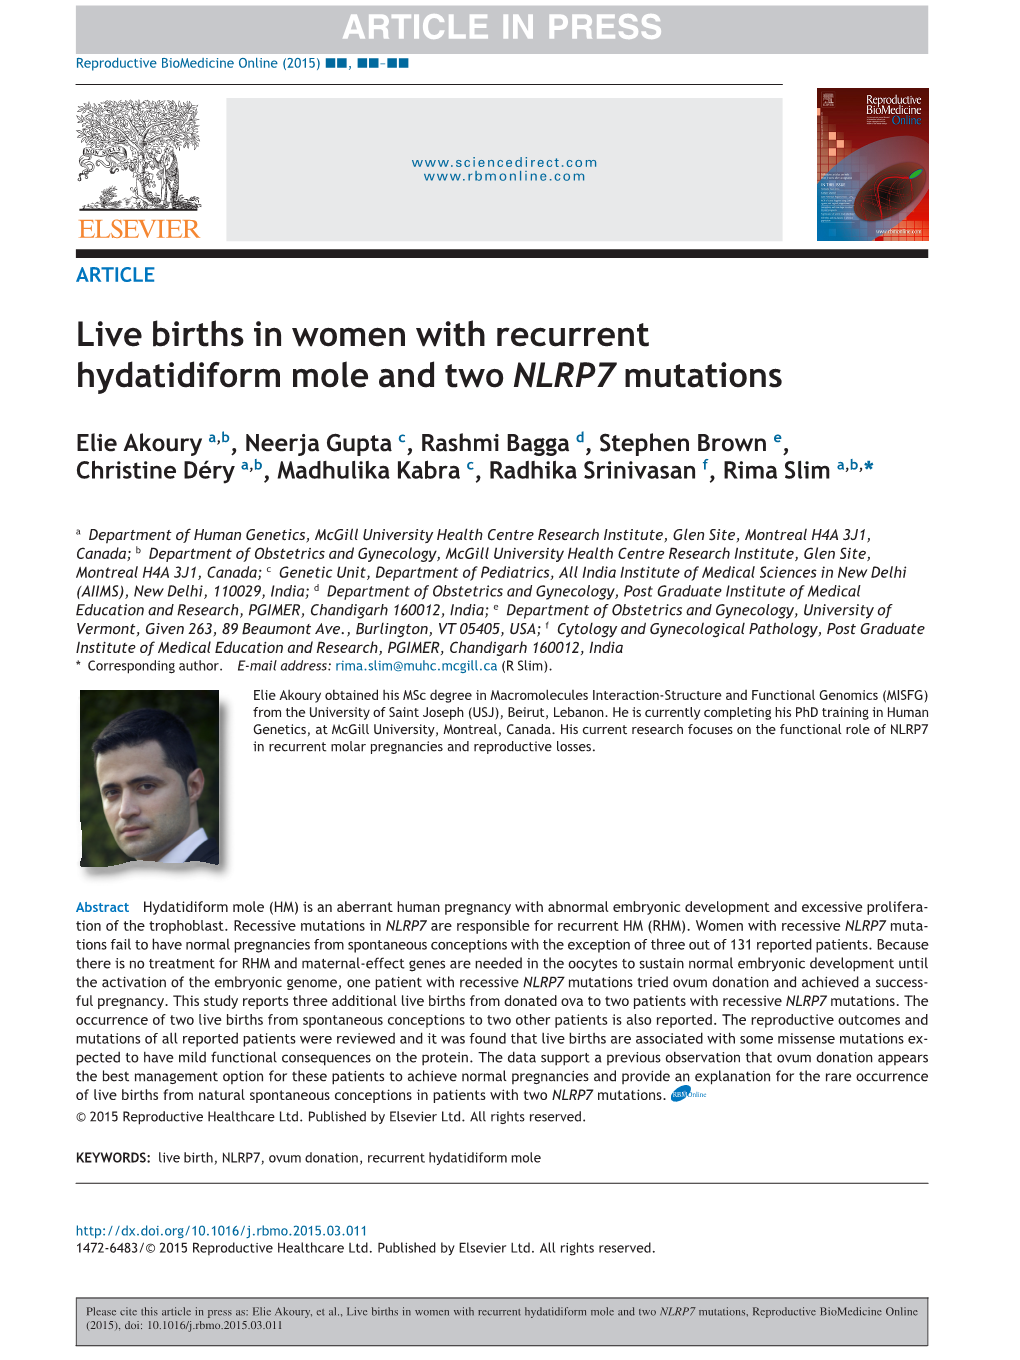 Live Births in Women with Recurrent Hydatidiform Mole and Two NLRP7 Mutations